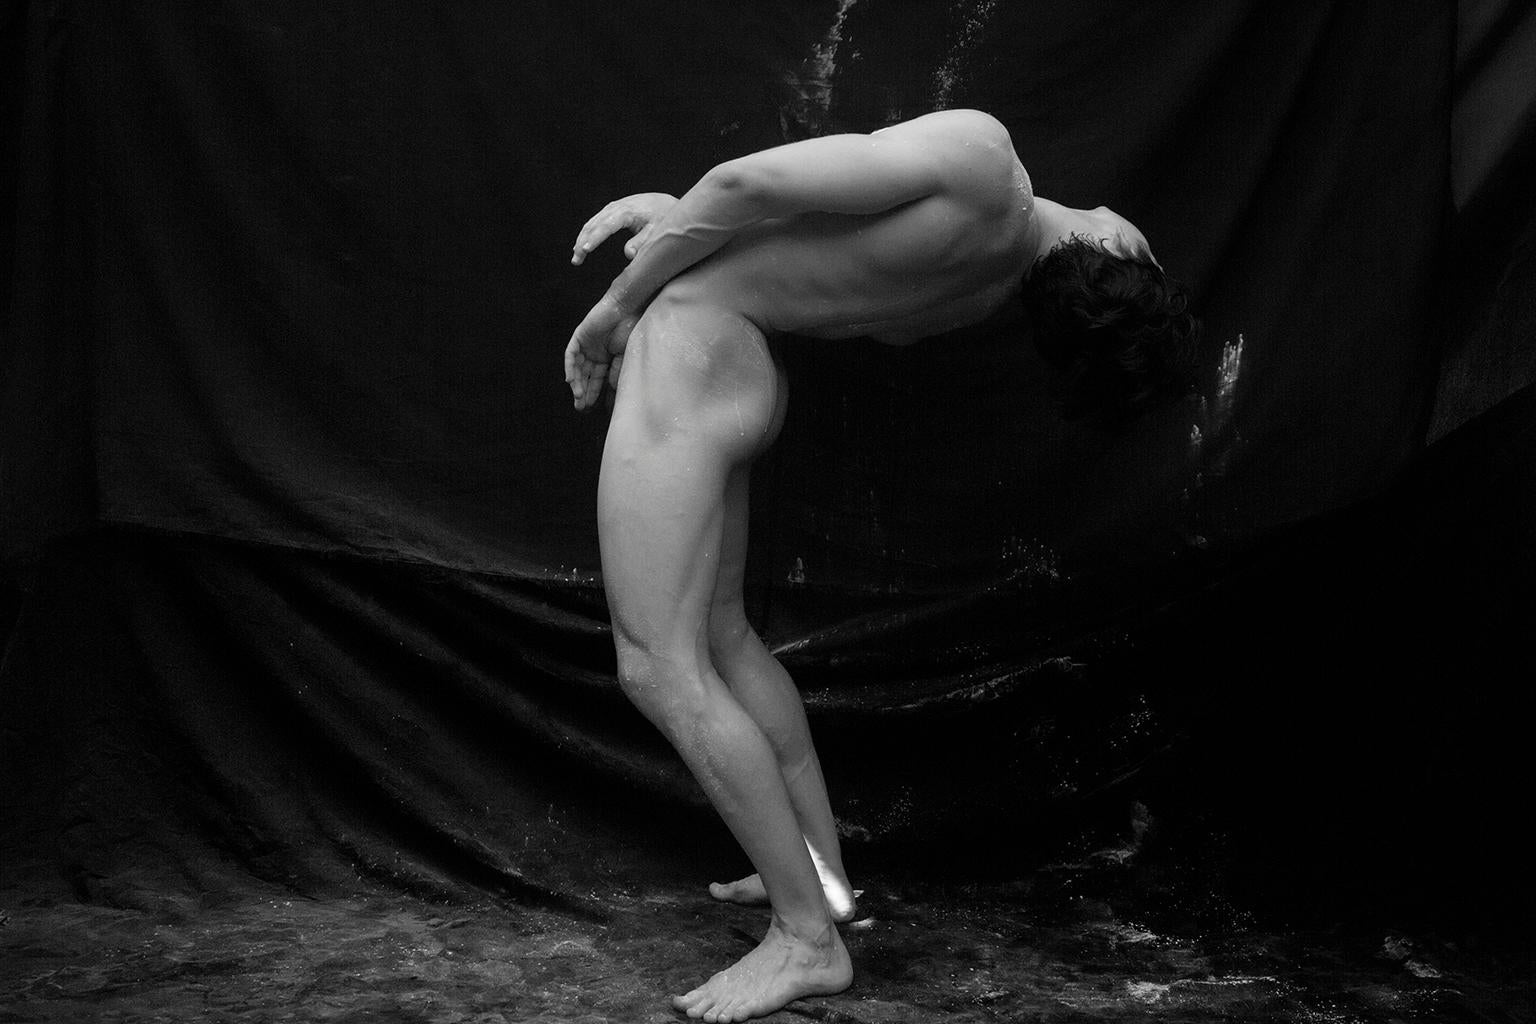 Ricky Cohete Nude Photograph - Untitled, From the series Acto Uno. Male Nude Limited Edition B&W Photograph